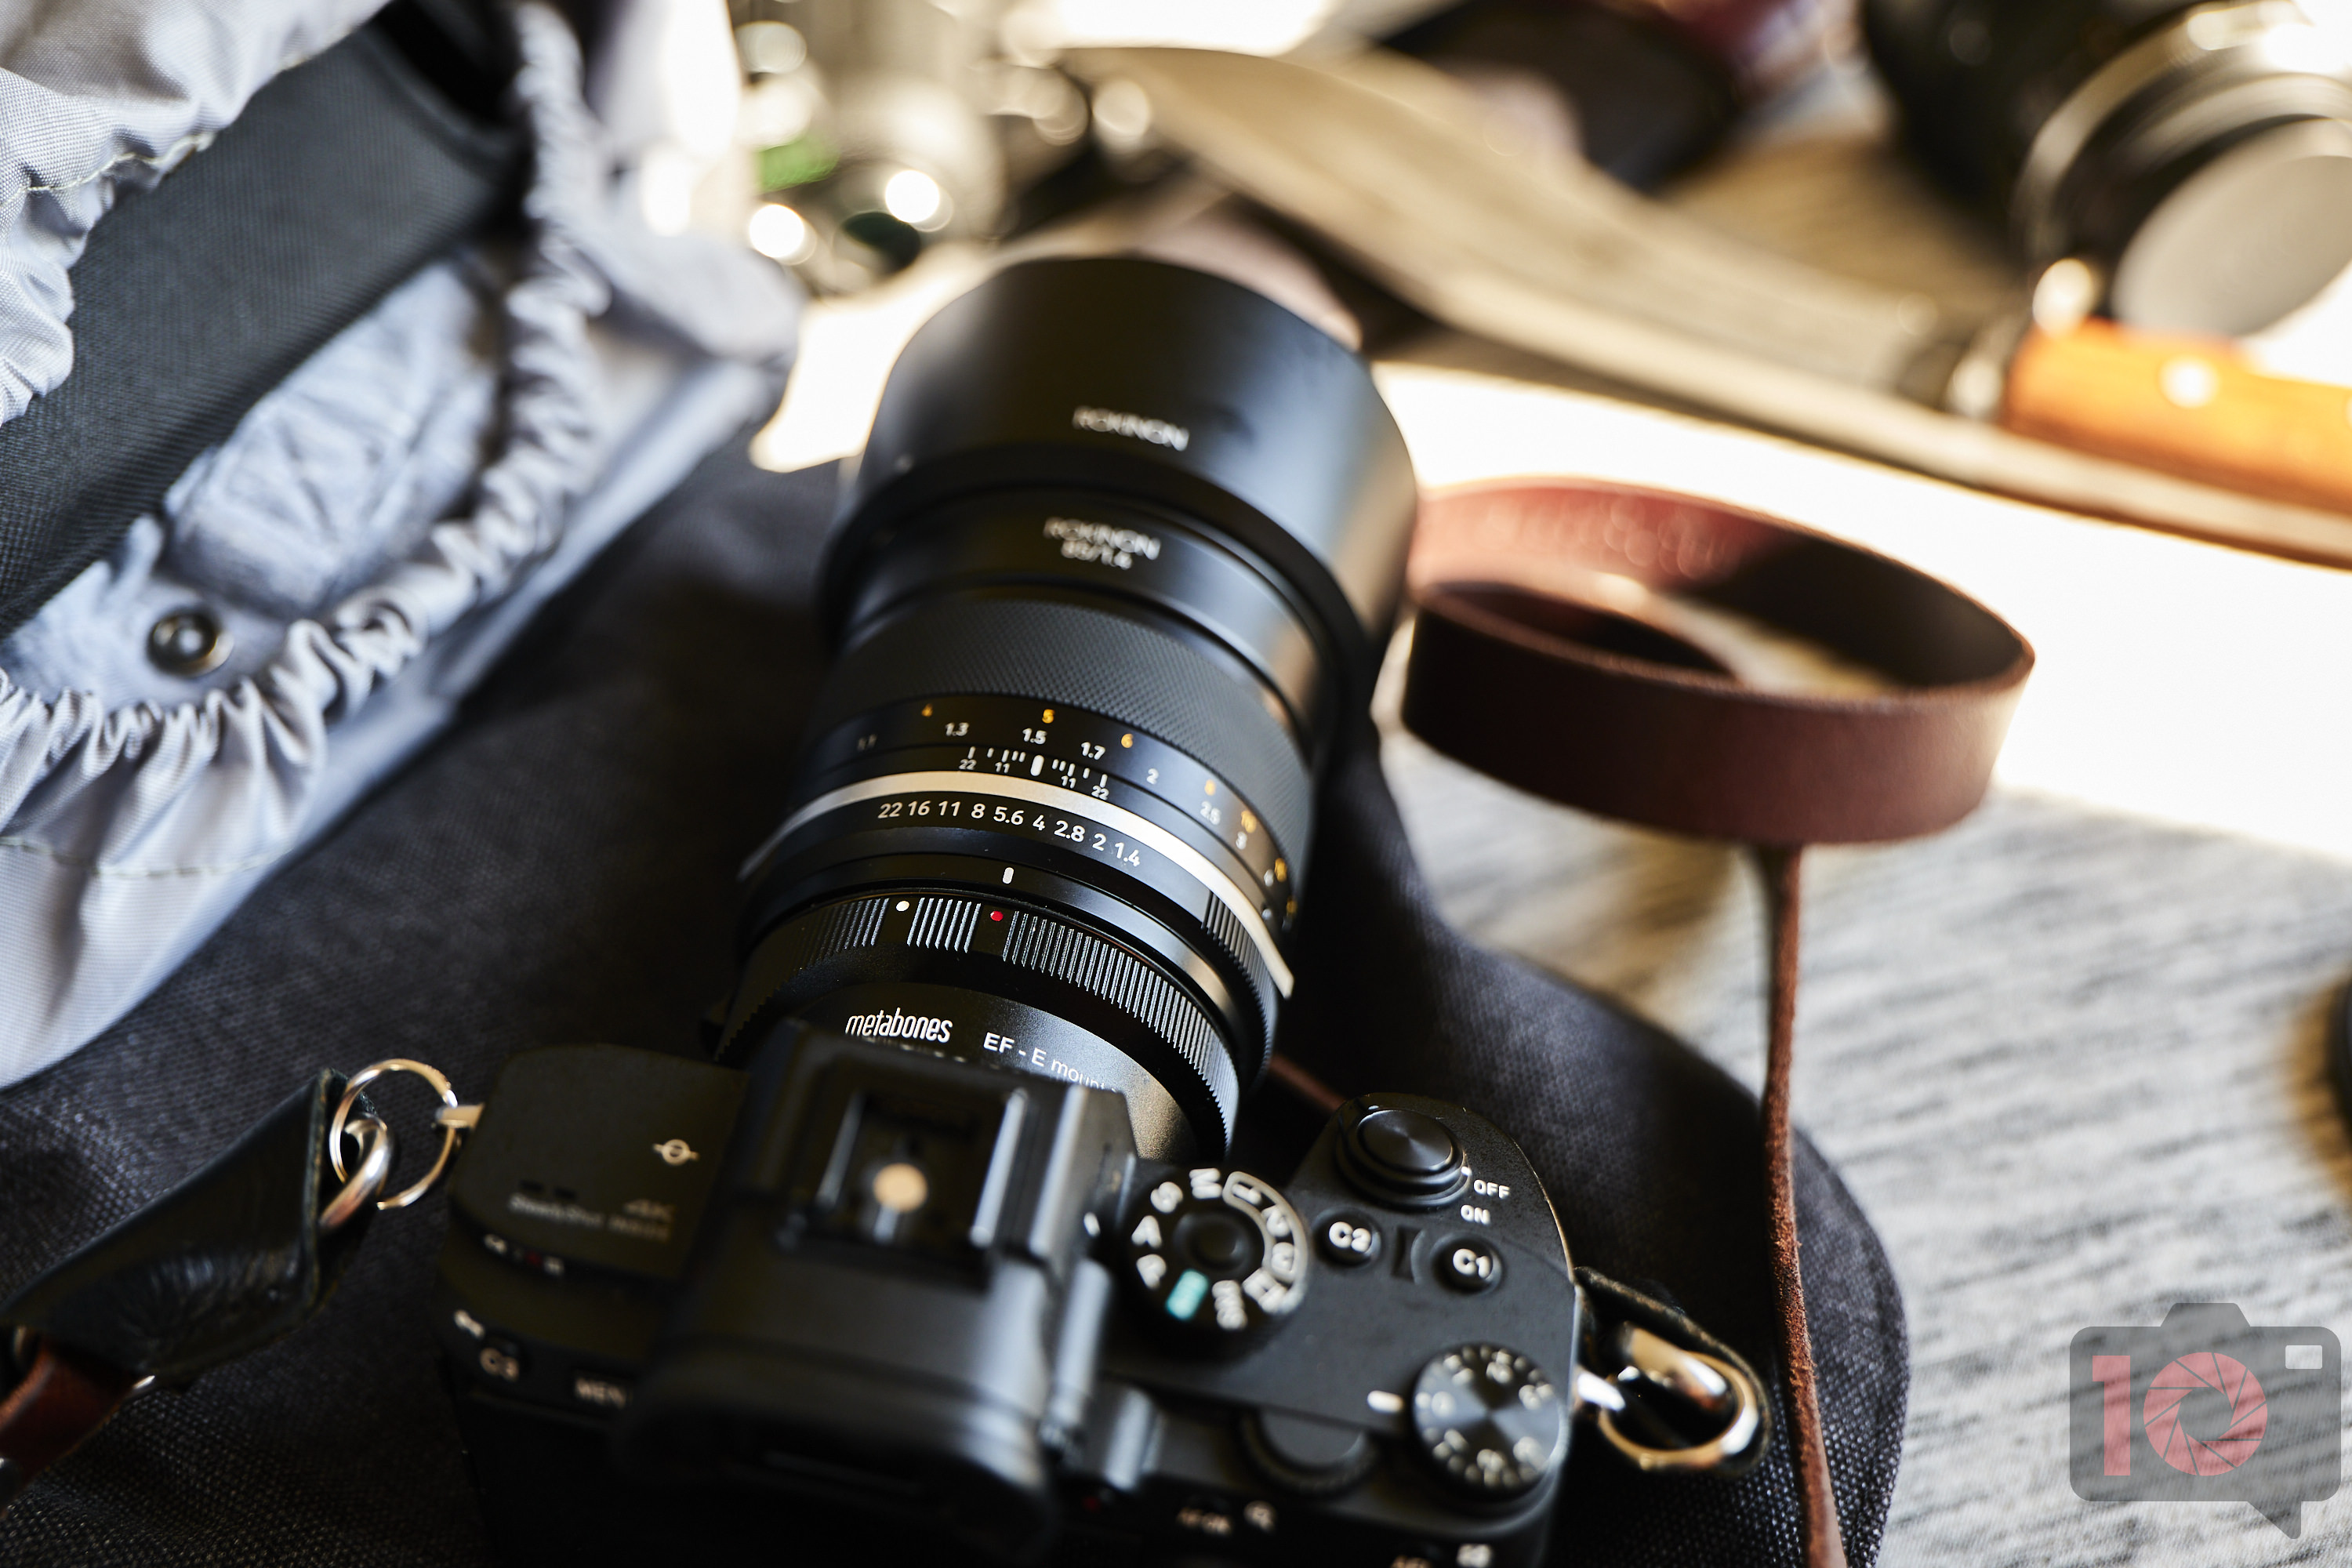 Chris Gampat The Phoblographer Samyang 85mm f1.4 II review Product images 2.81-200s800